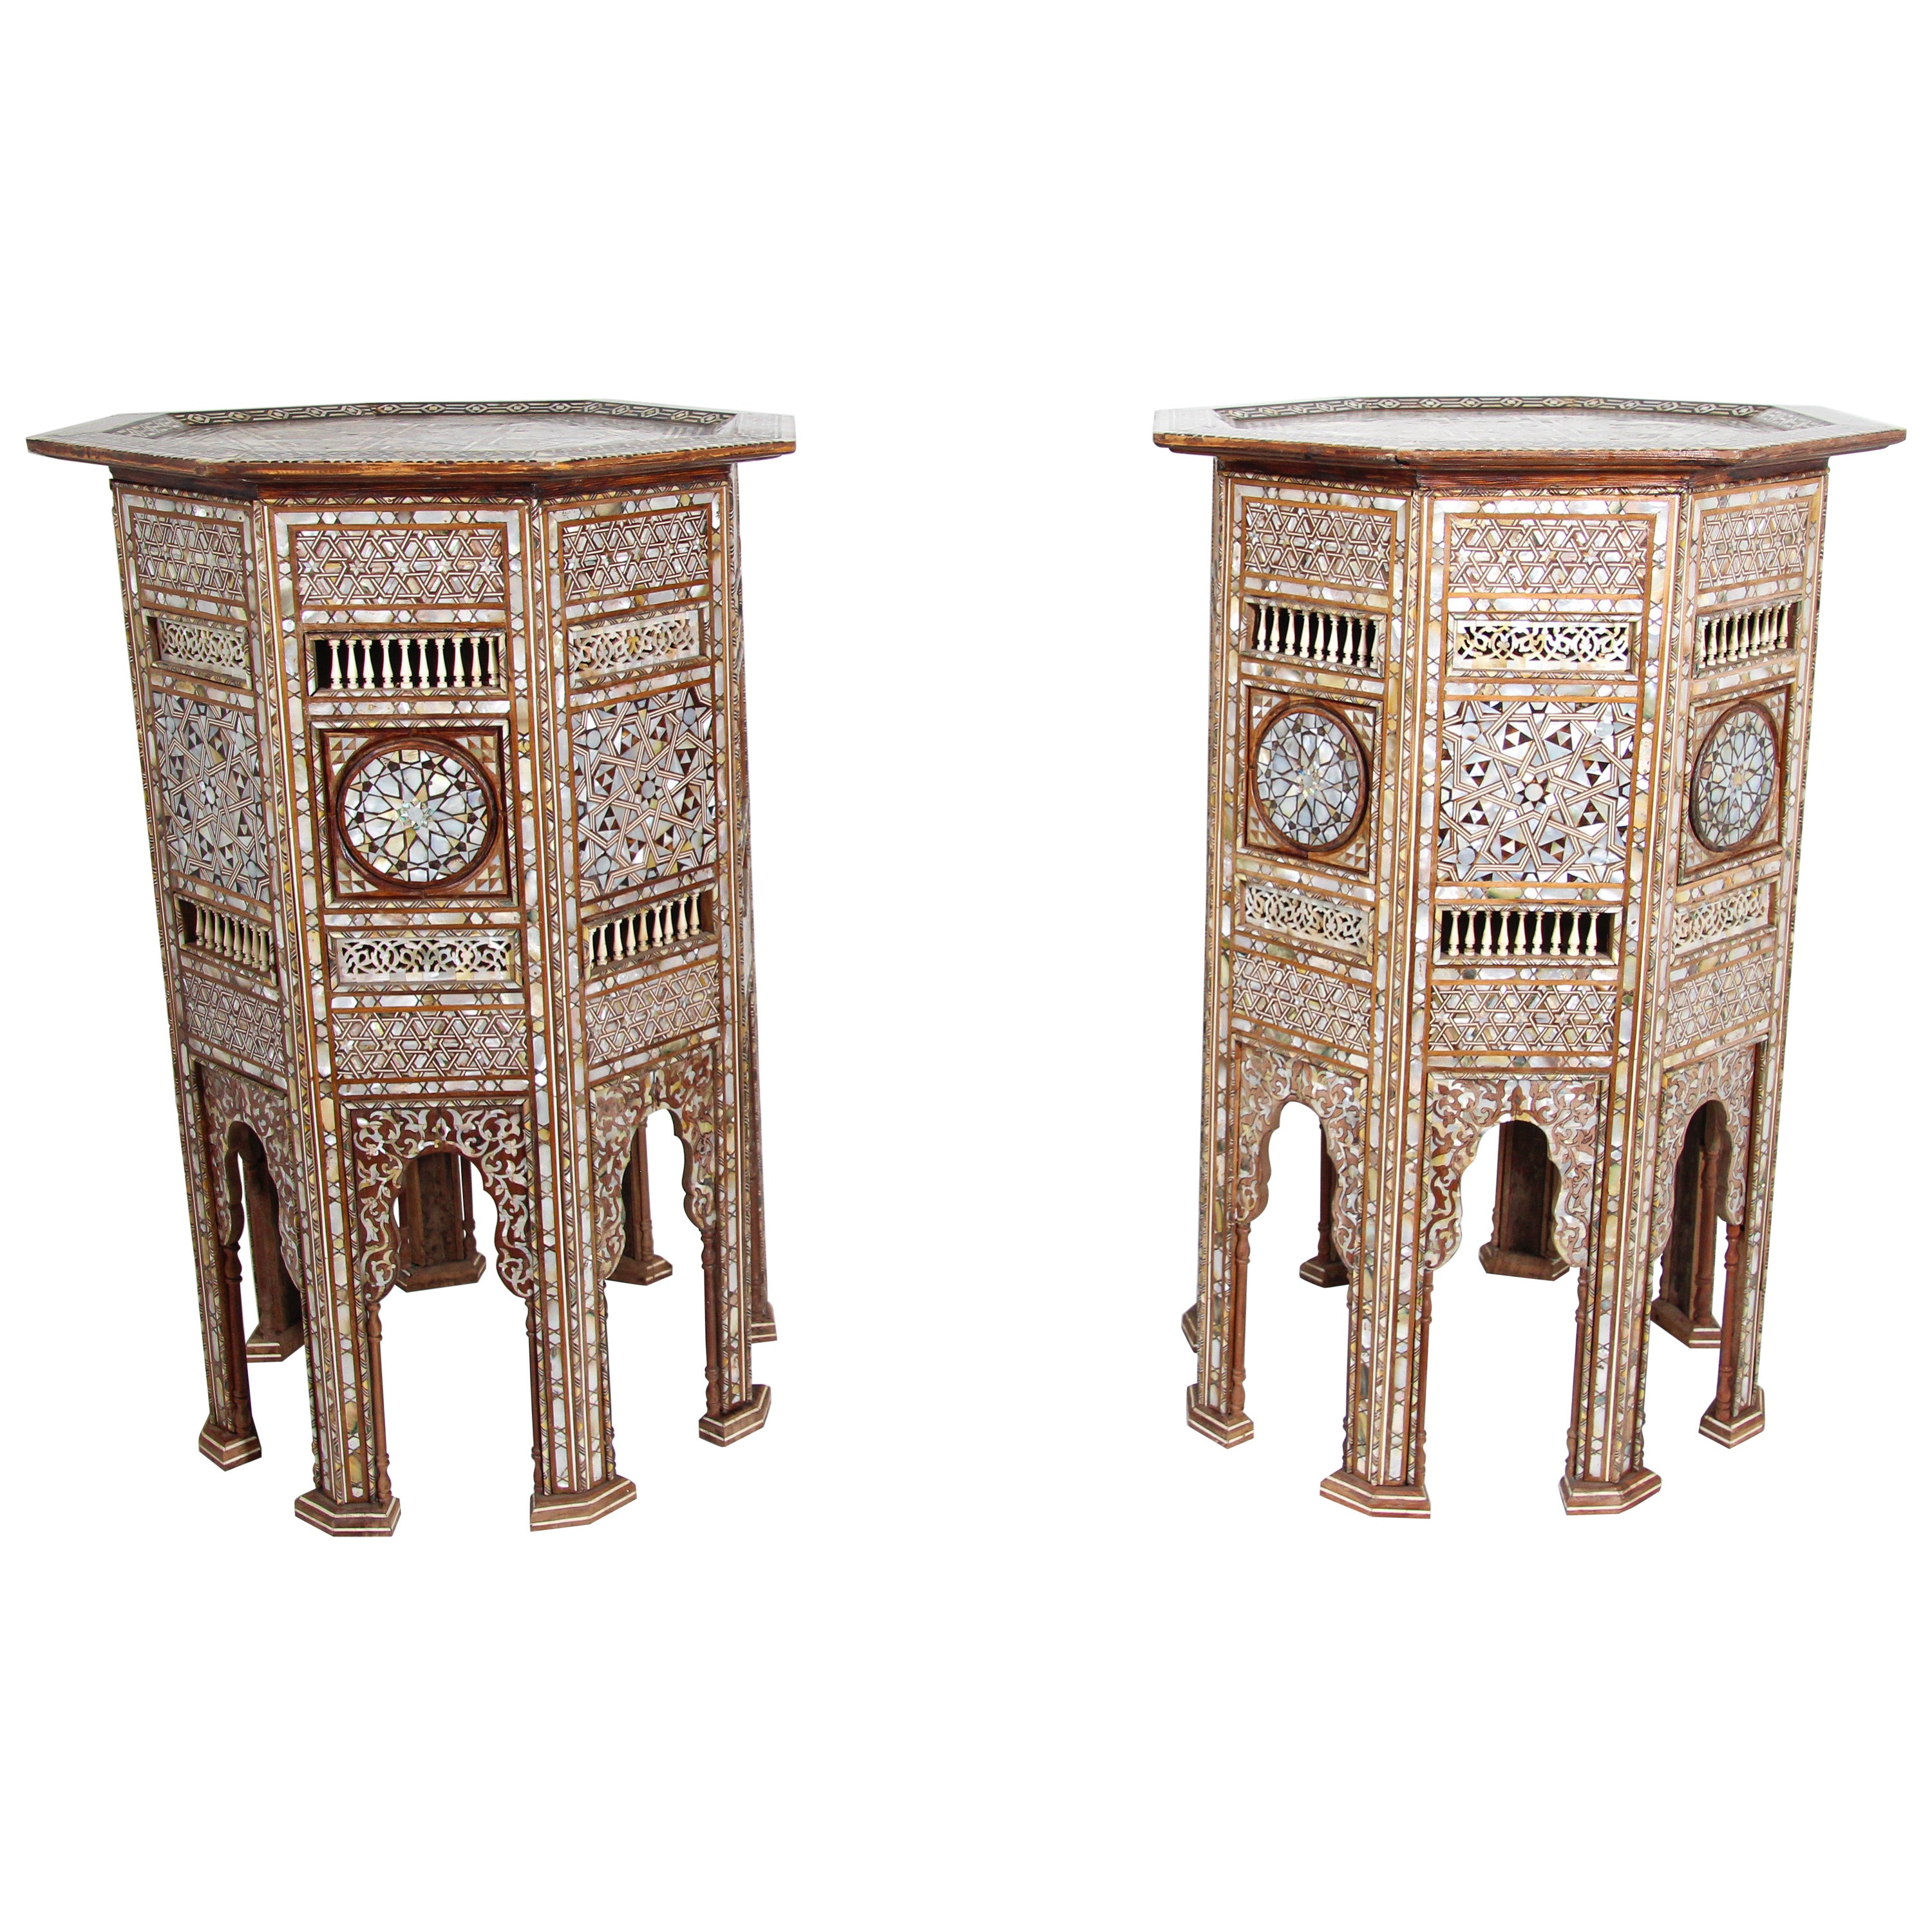 Moorish Middle Eastern Large Pedestal Tables Inlaid with Shell, 19th C. For Sale